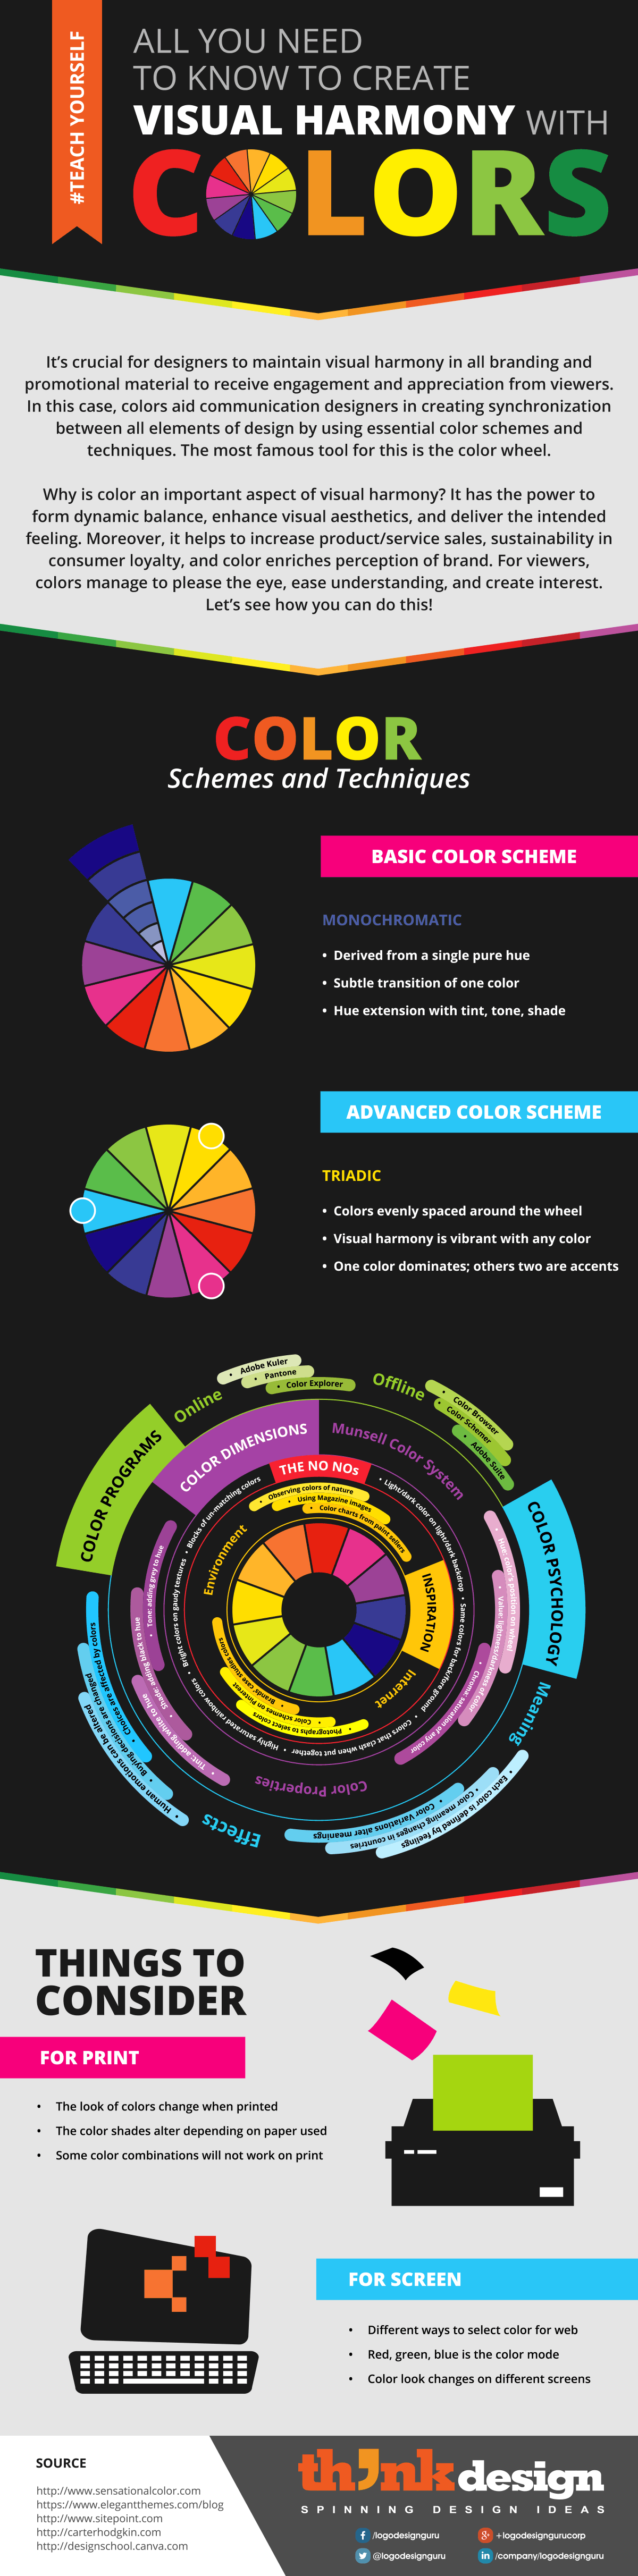 Teach yourself All You Need to Know to Create Visual Harmony with Colors  Infographic